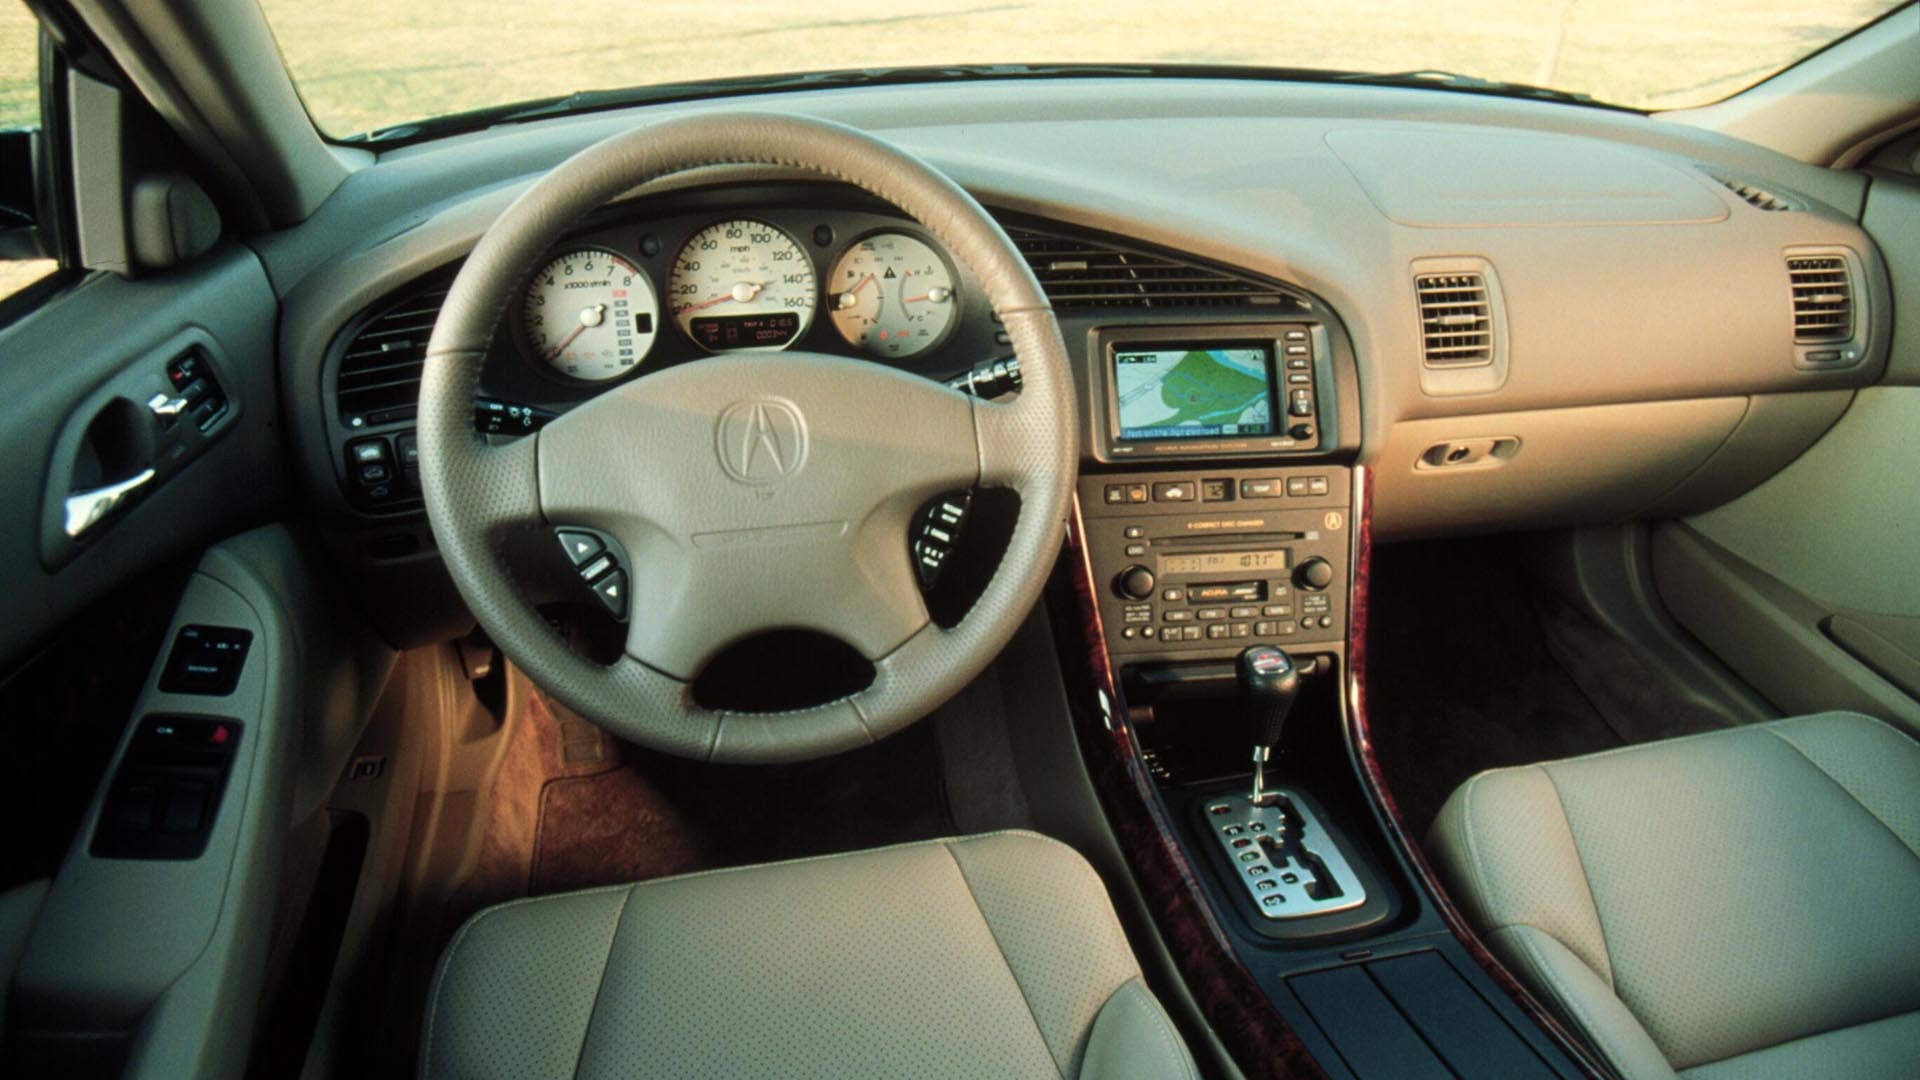 <p class="caption-title">2001 Acura 3.2CL Type S</p>, The 2001 Acura 3.2CL Type S featured a driver-focused dashboard., <i>Acura</i>